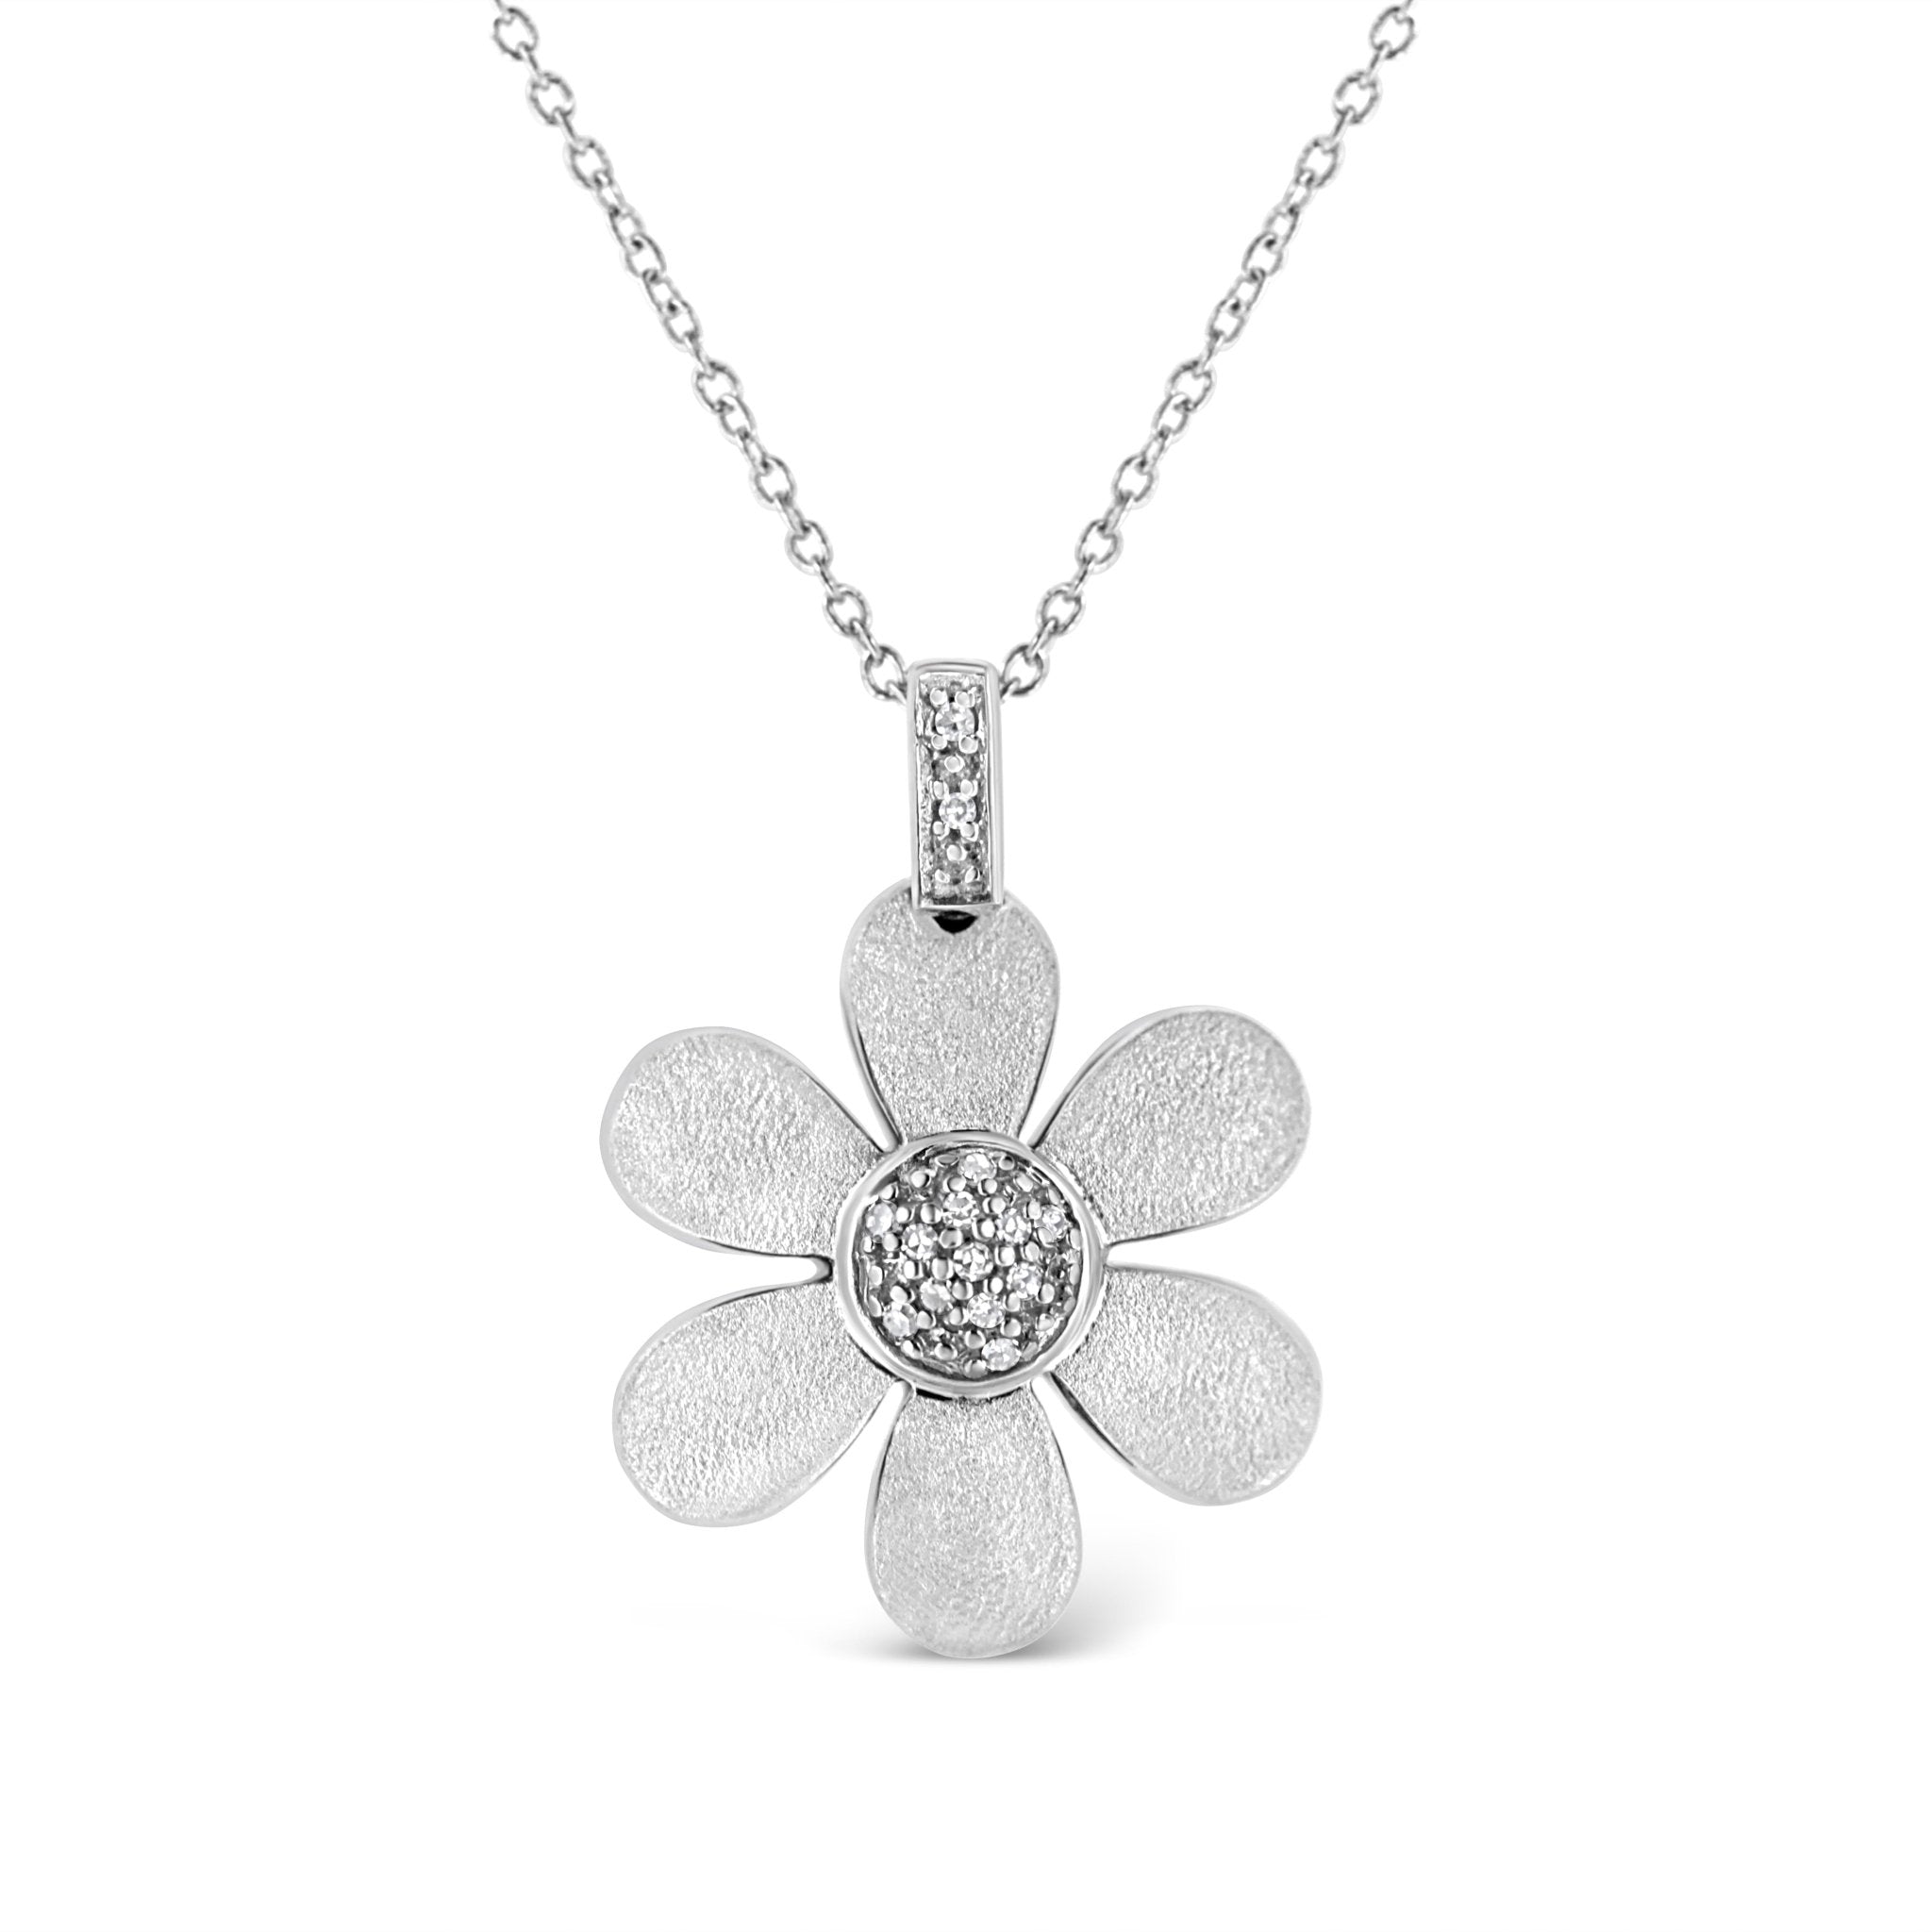 .925 Sterling Silver Pave-Set Diamond Accent Flower 18" Pendant Necklace (I-J Color, I1-I2 Clarity) - Tuesday Morning-Pendant Necklace